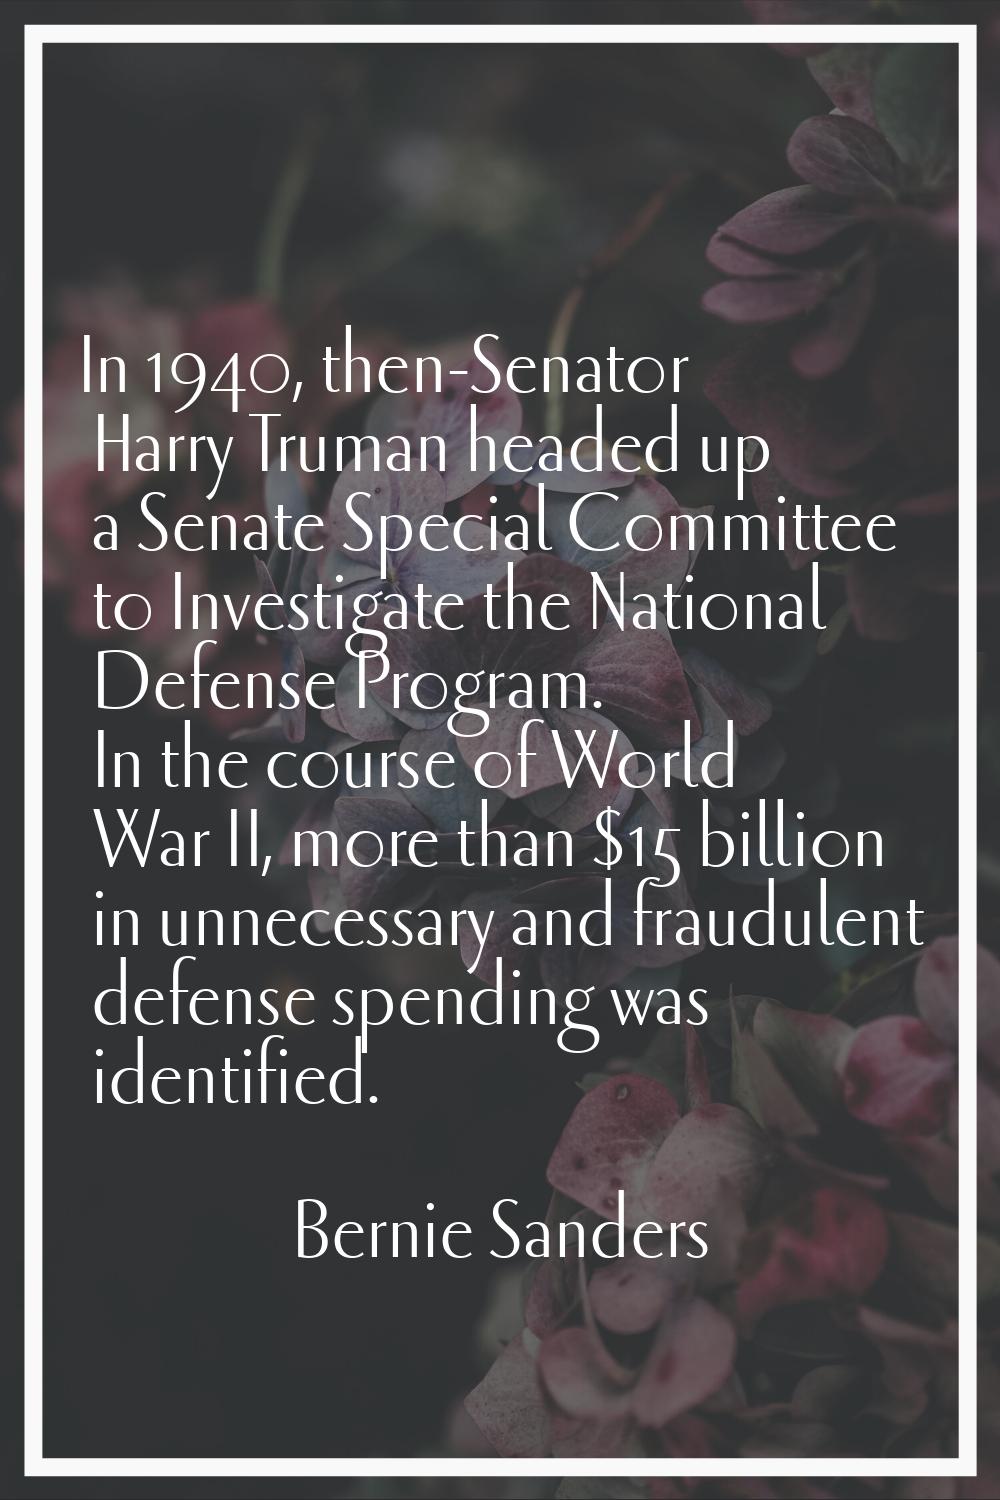 In 1940, then-Senator Harry Truman headed up a Senate Special Committee to Investigate the National